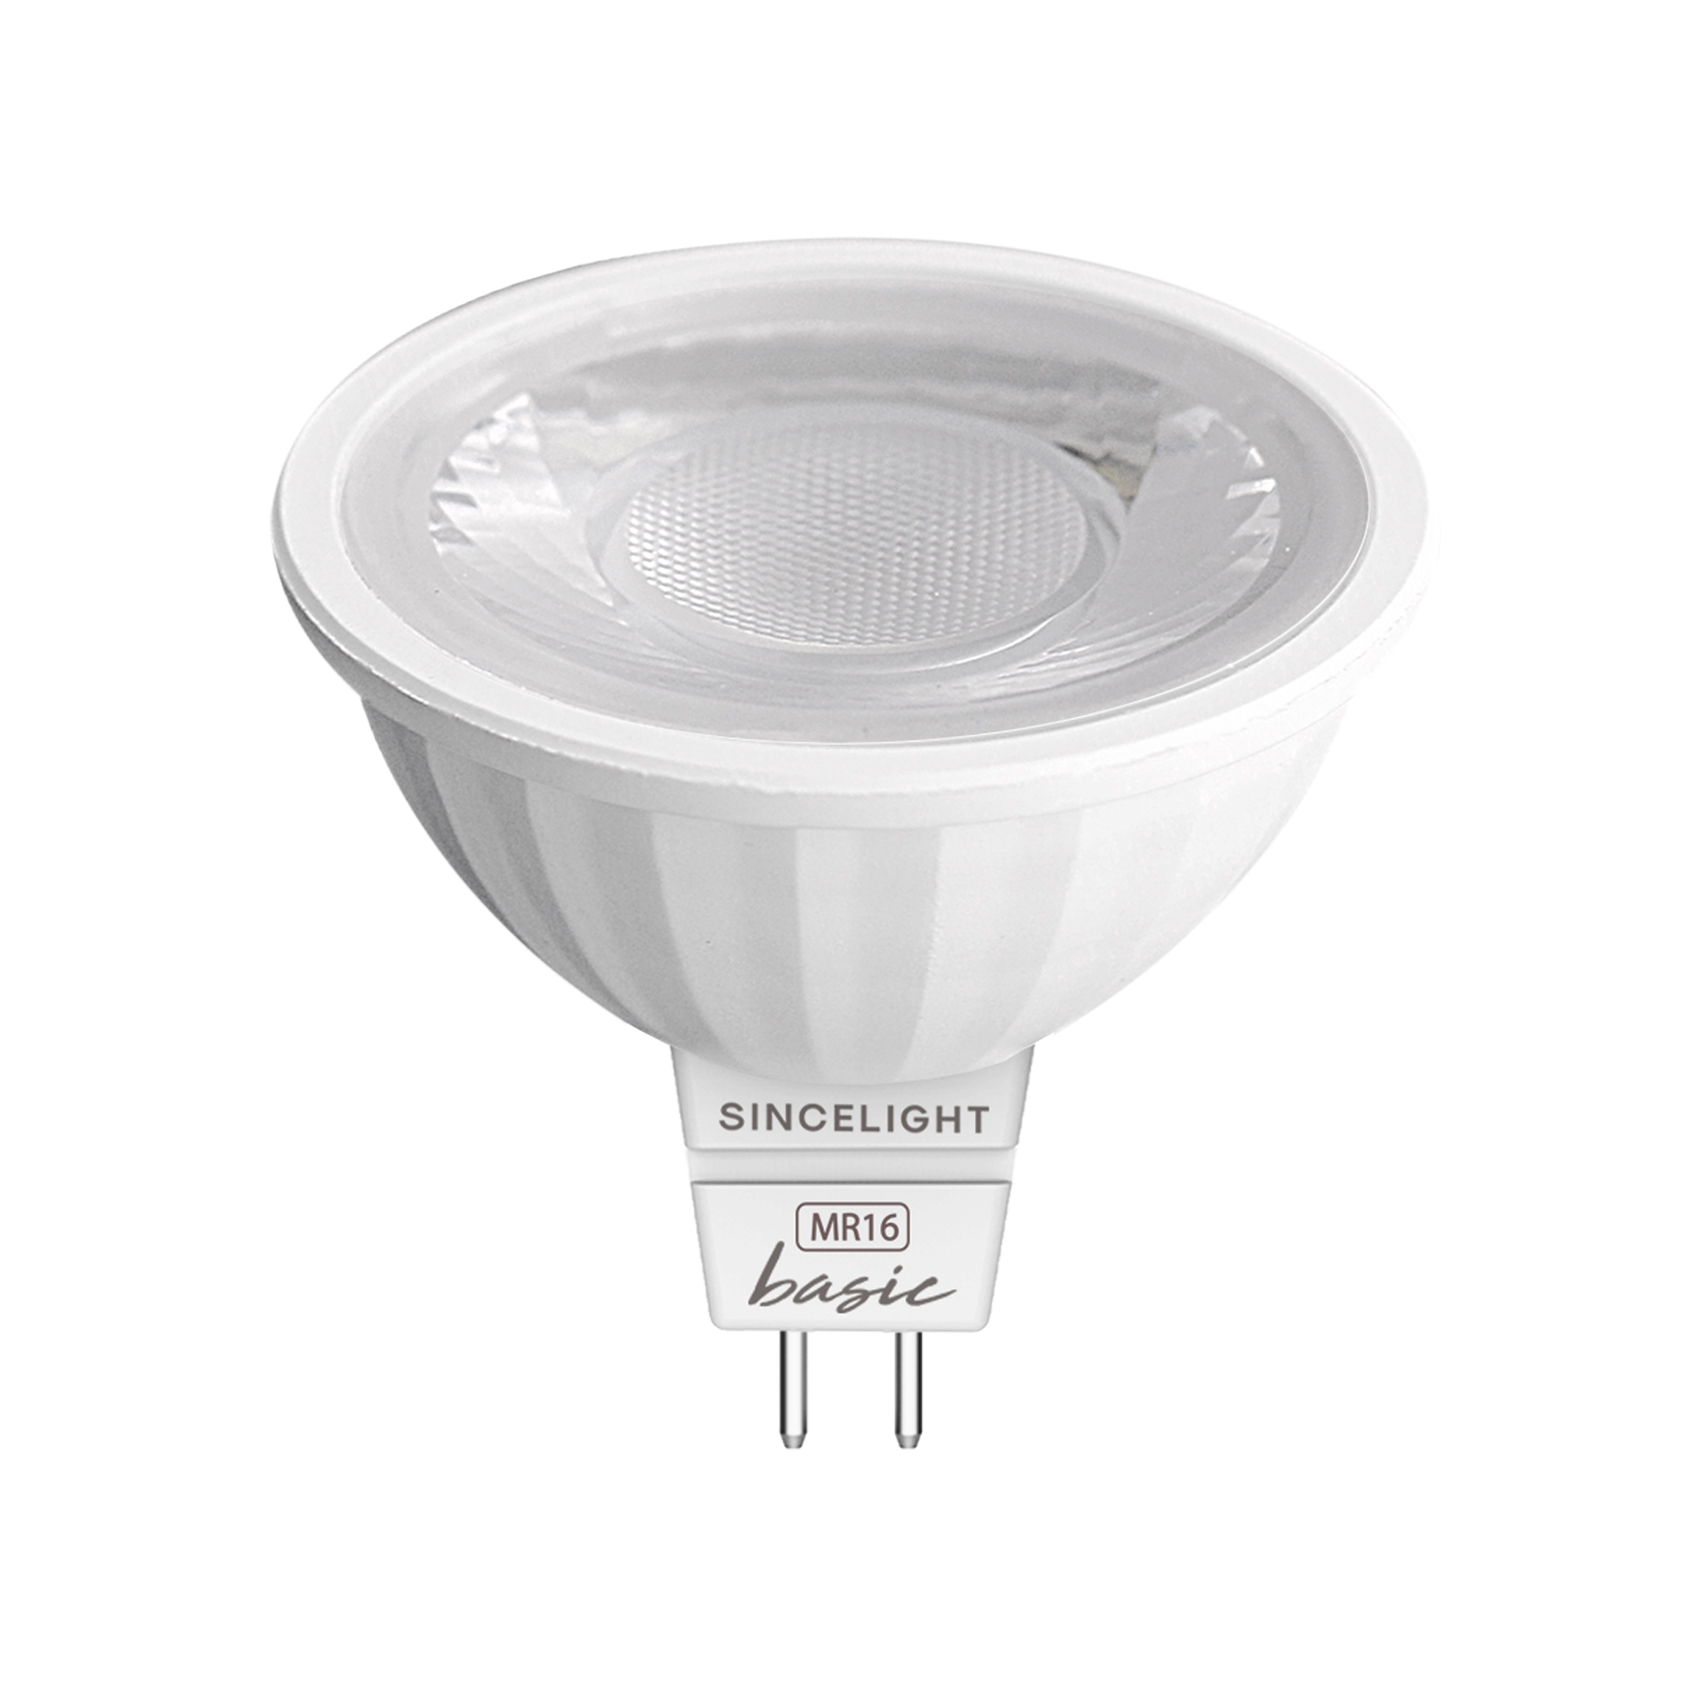 6W MR16 LED Reflector Bulb with ∠38° Beam Angle